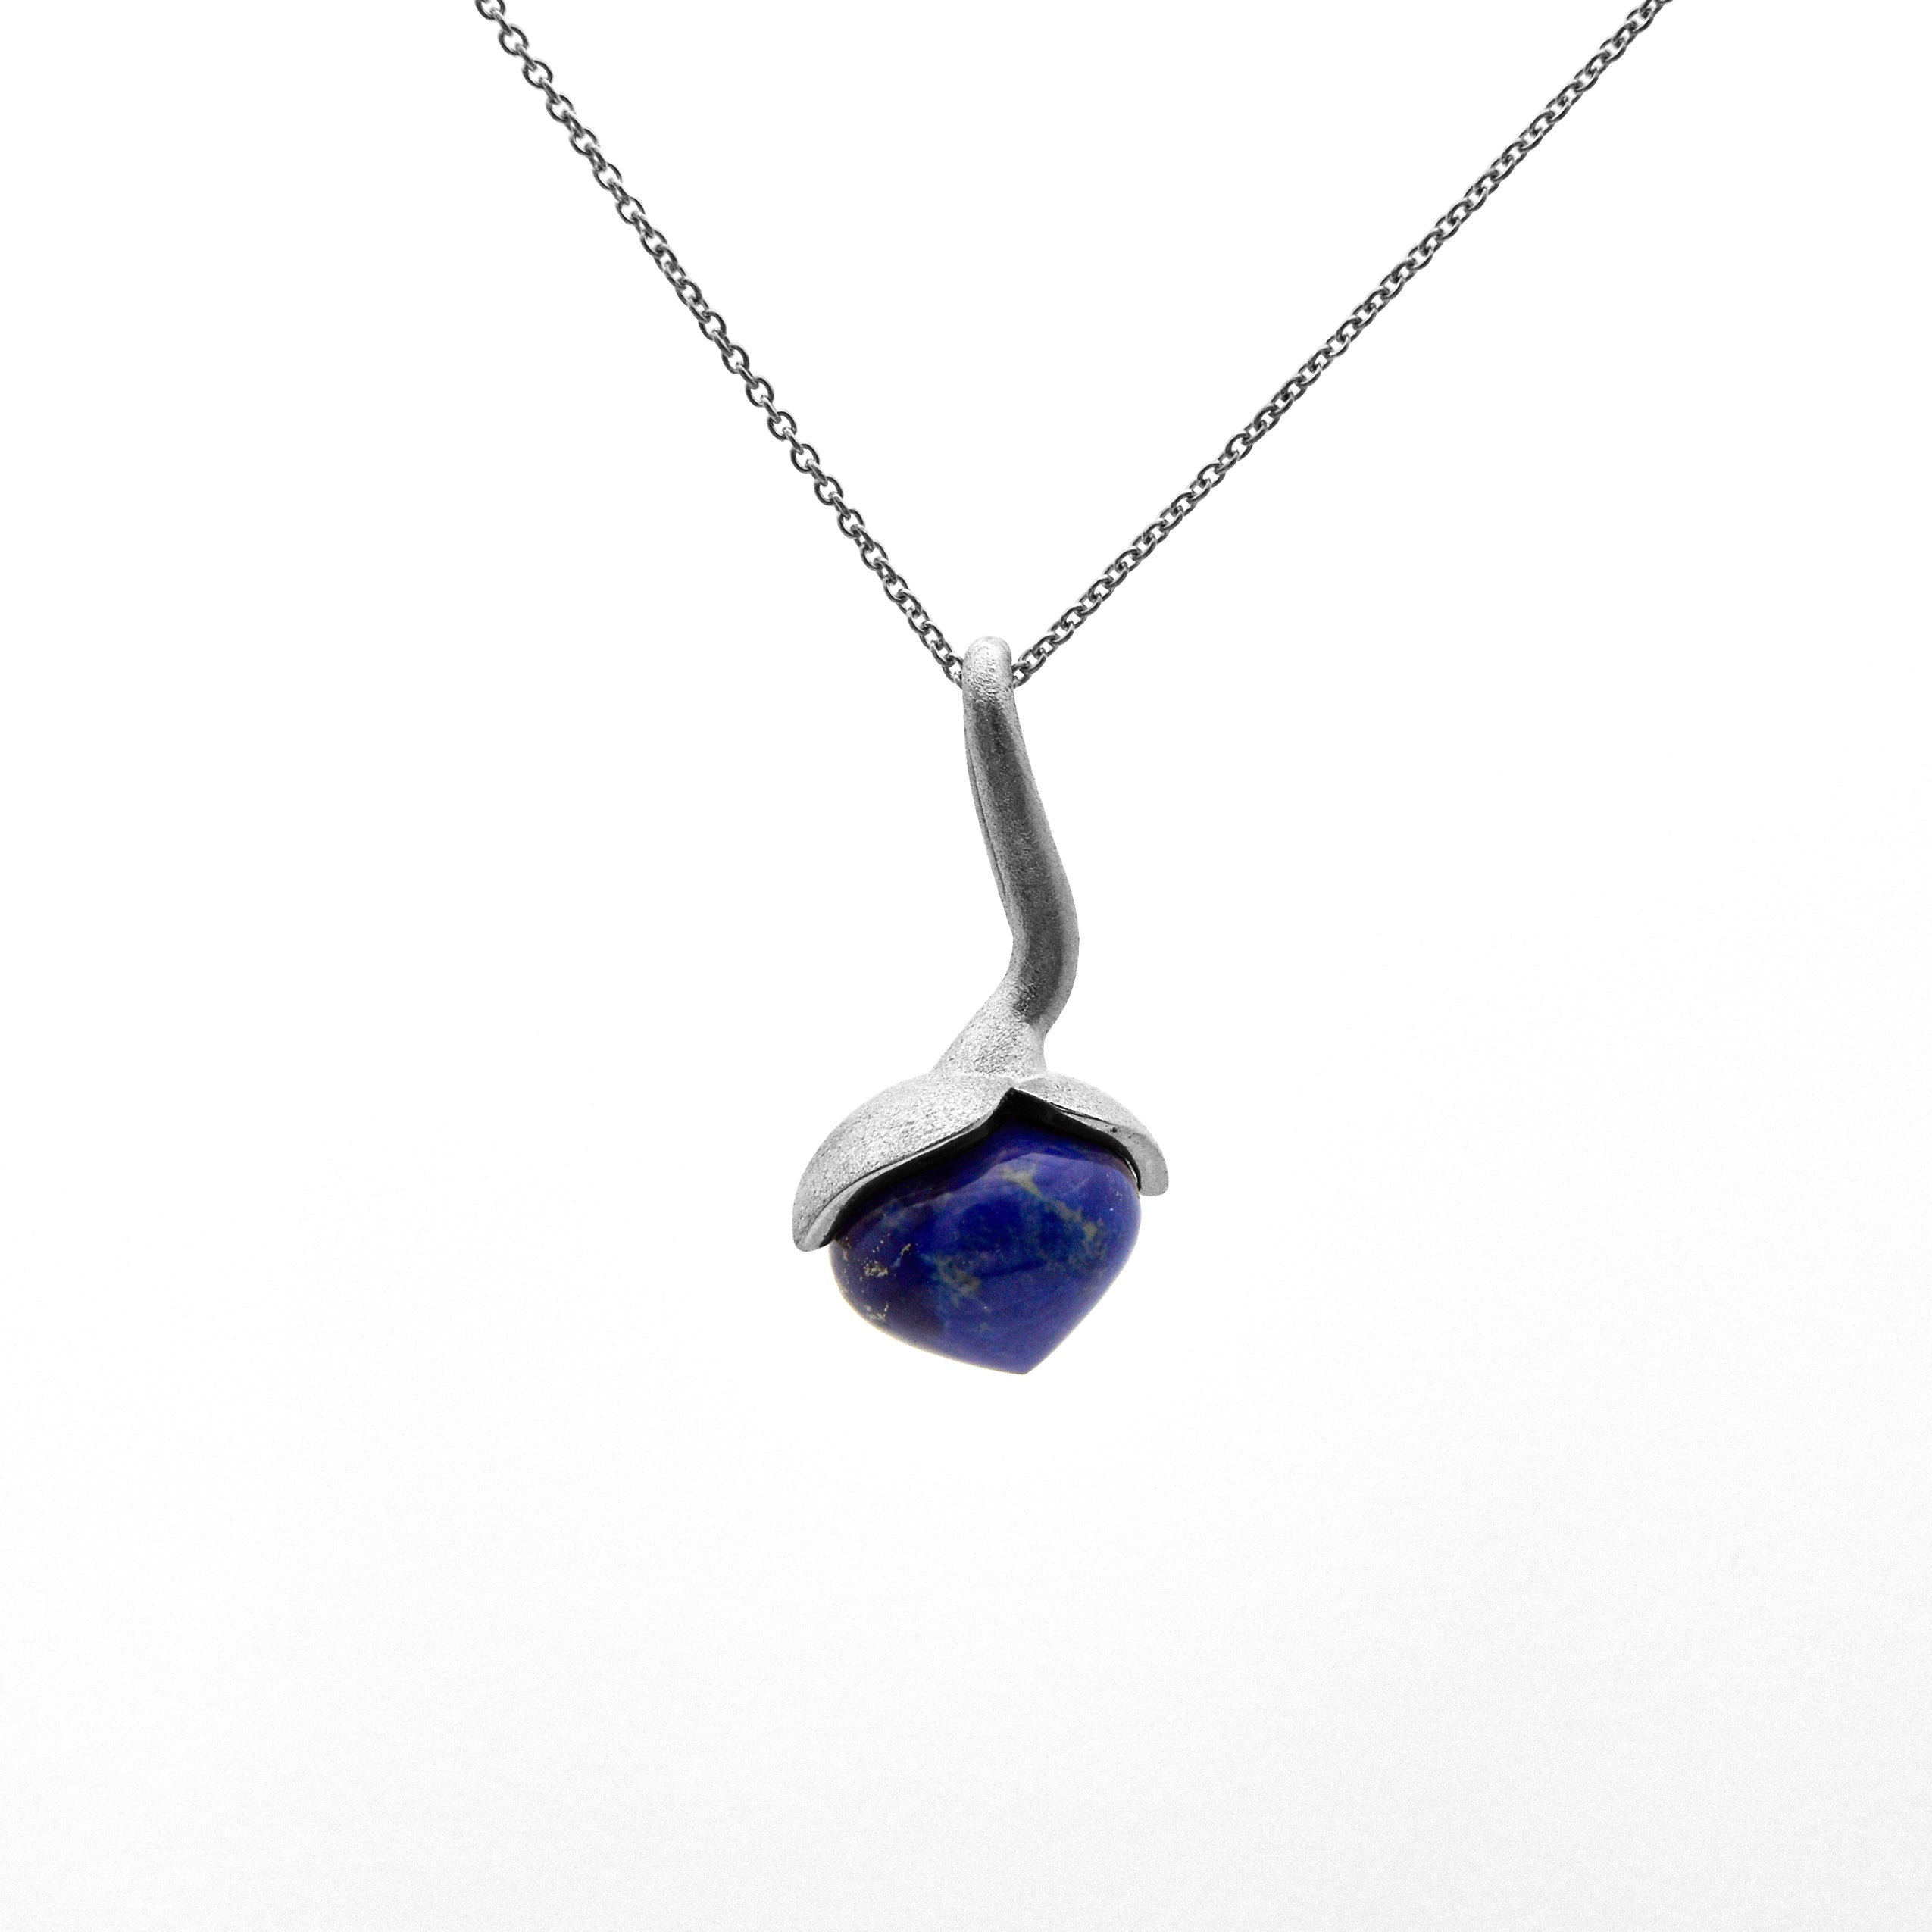 Dolce pendant "big" with lapis 925/-